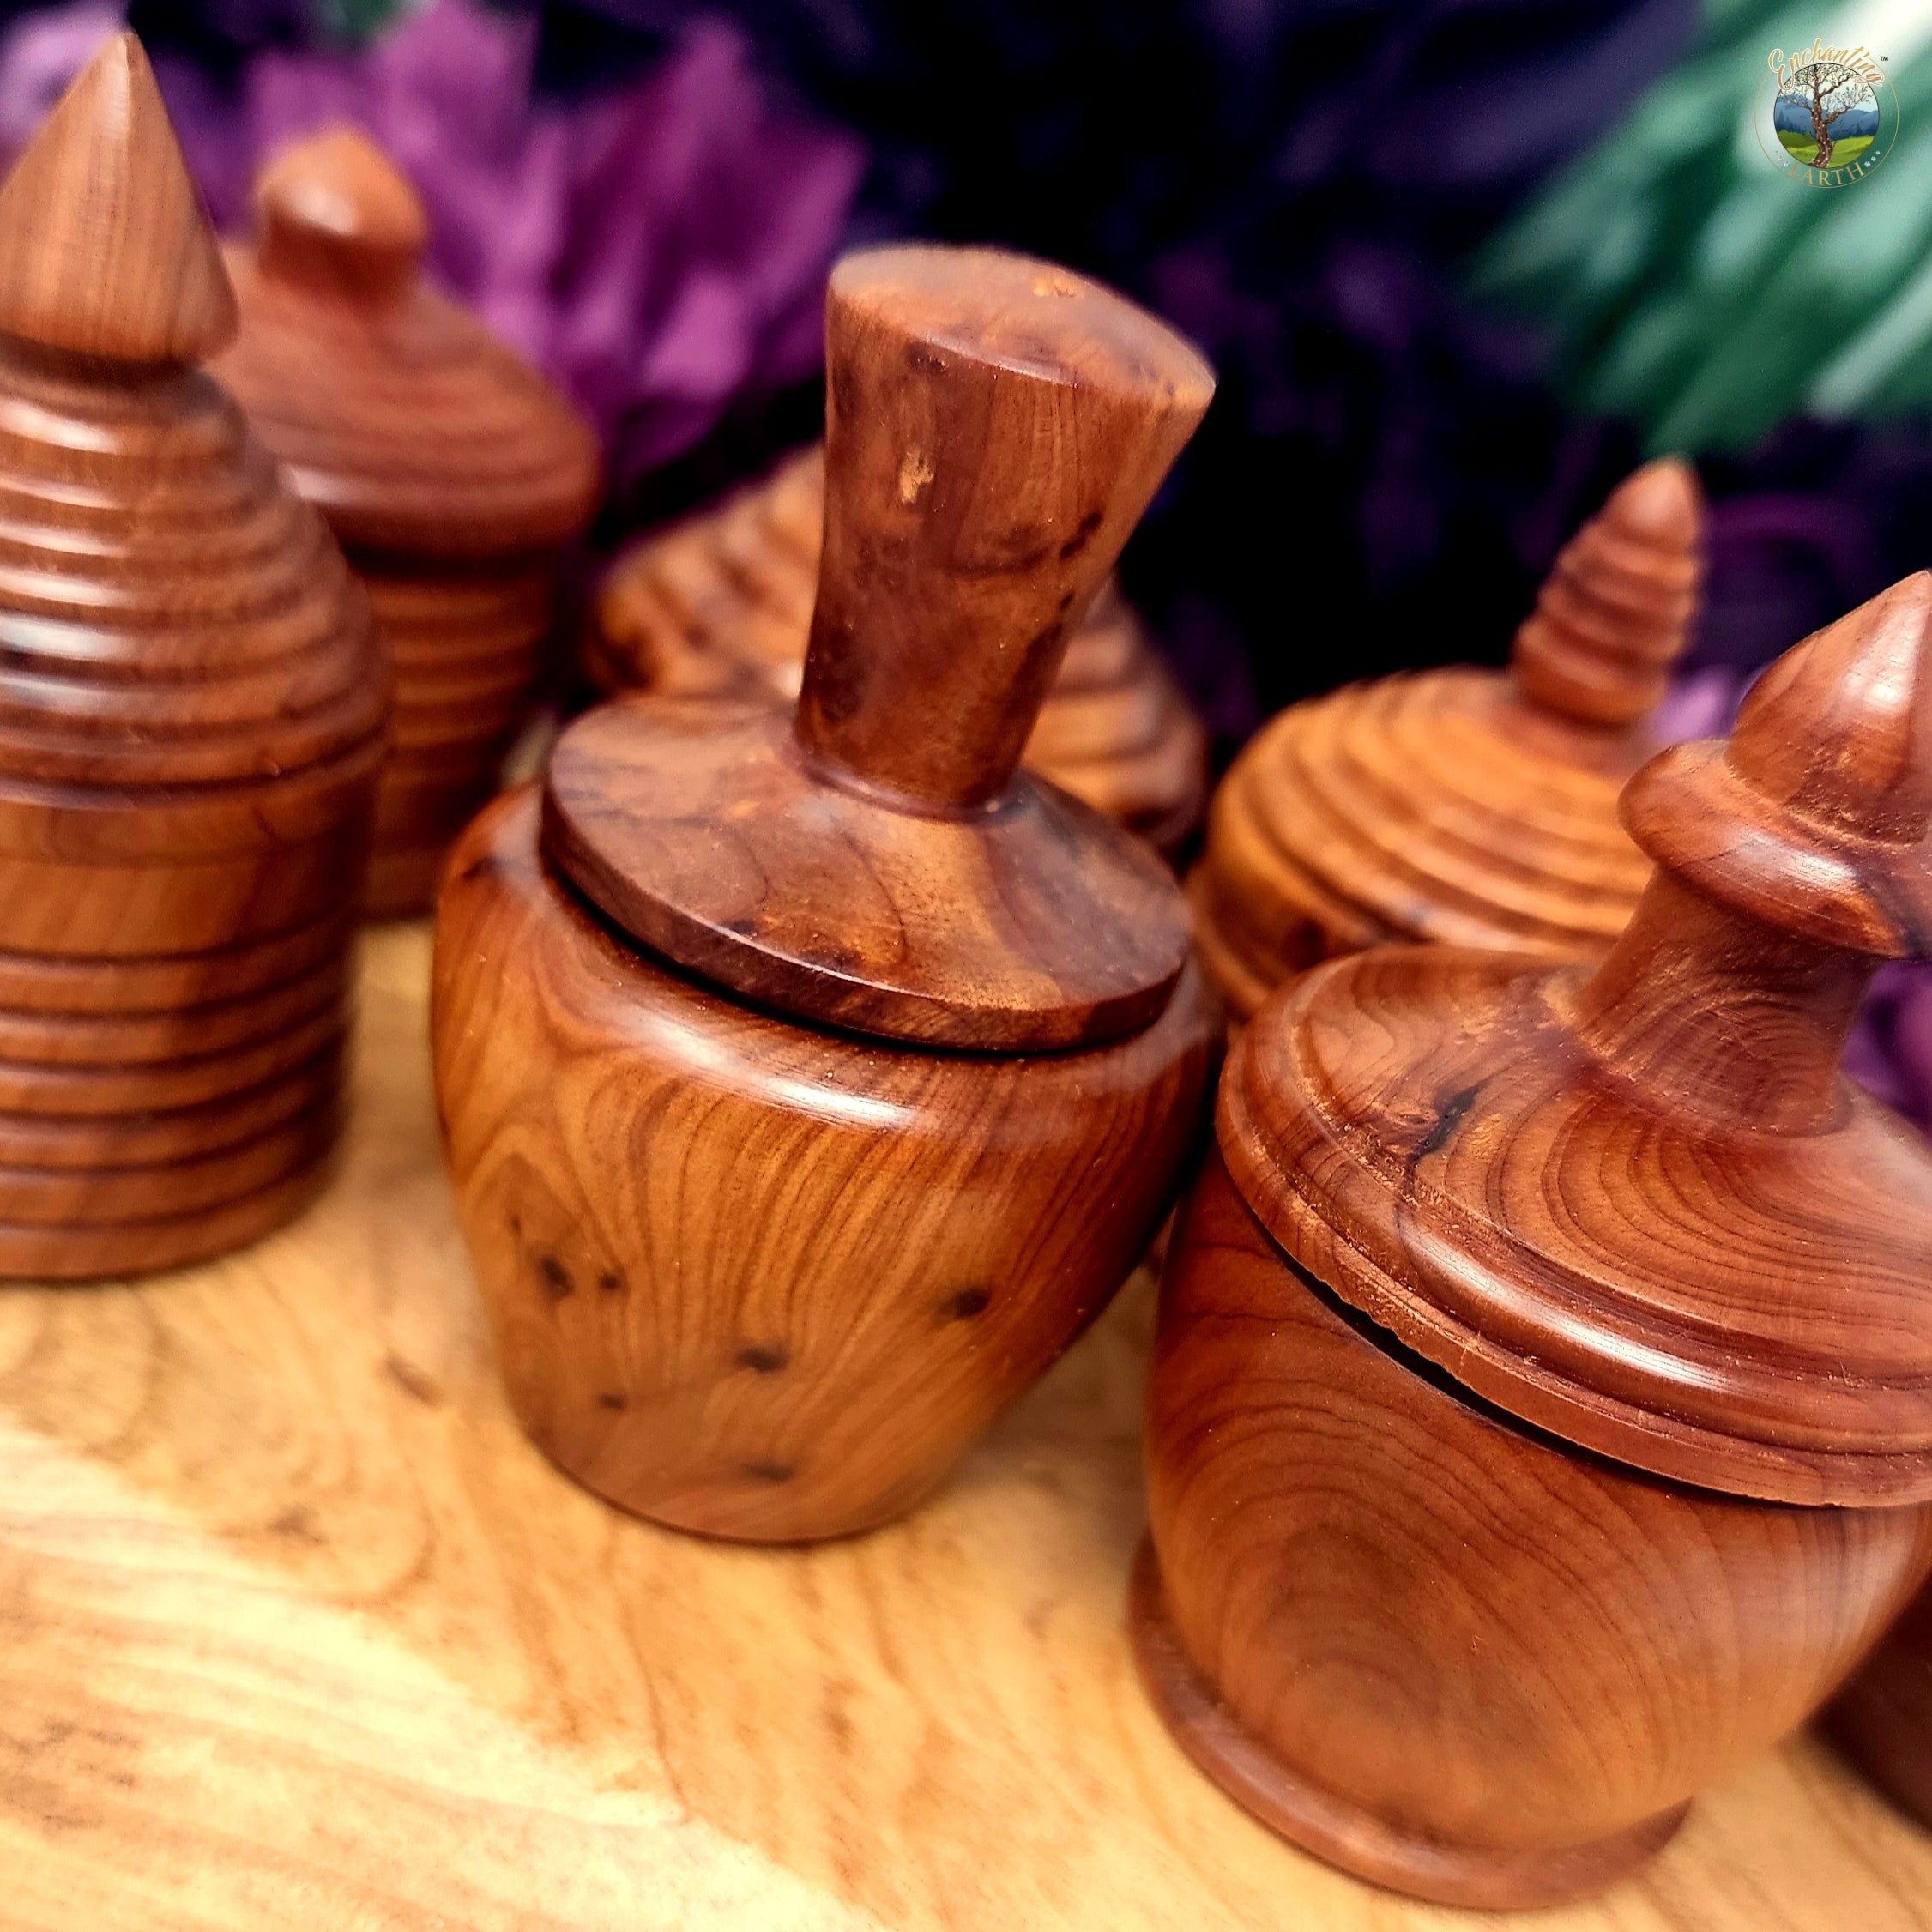 Thuya Wood Mini Box for Storing Crystals and Elevating your Mood